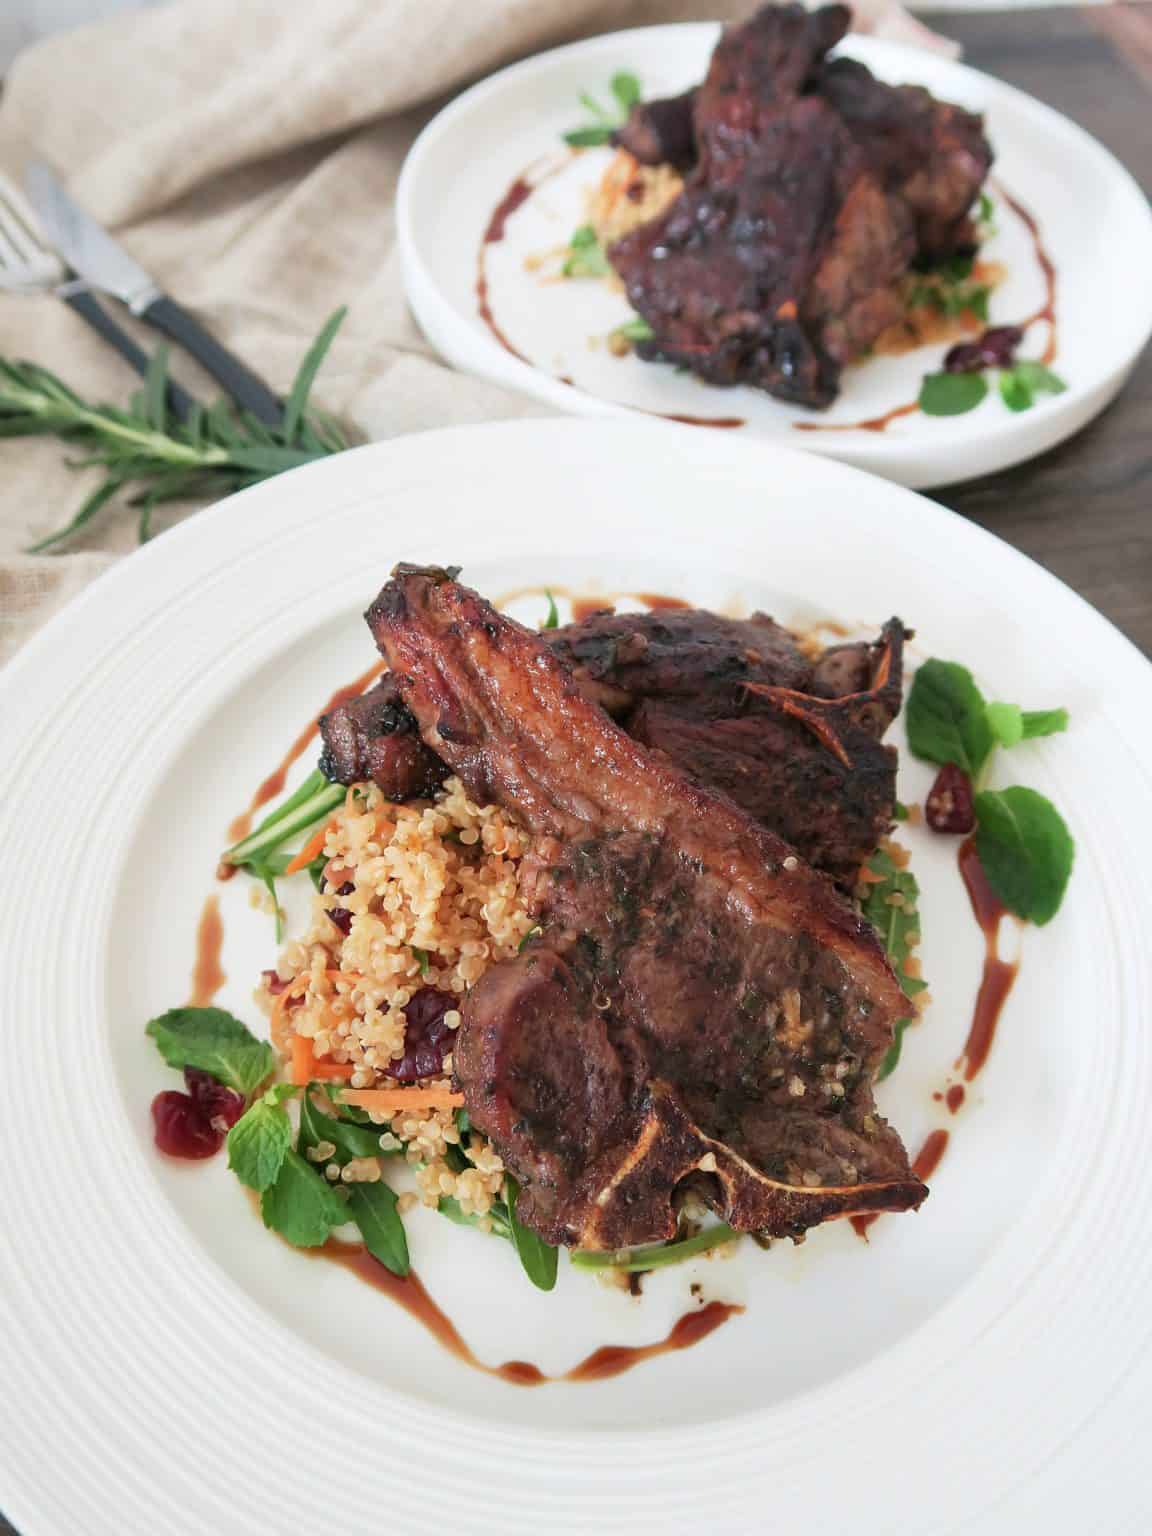 Balsamic, mint and rosemary lamb chops with quinoa salad Image